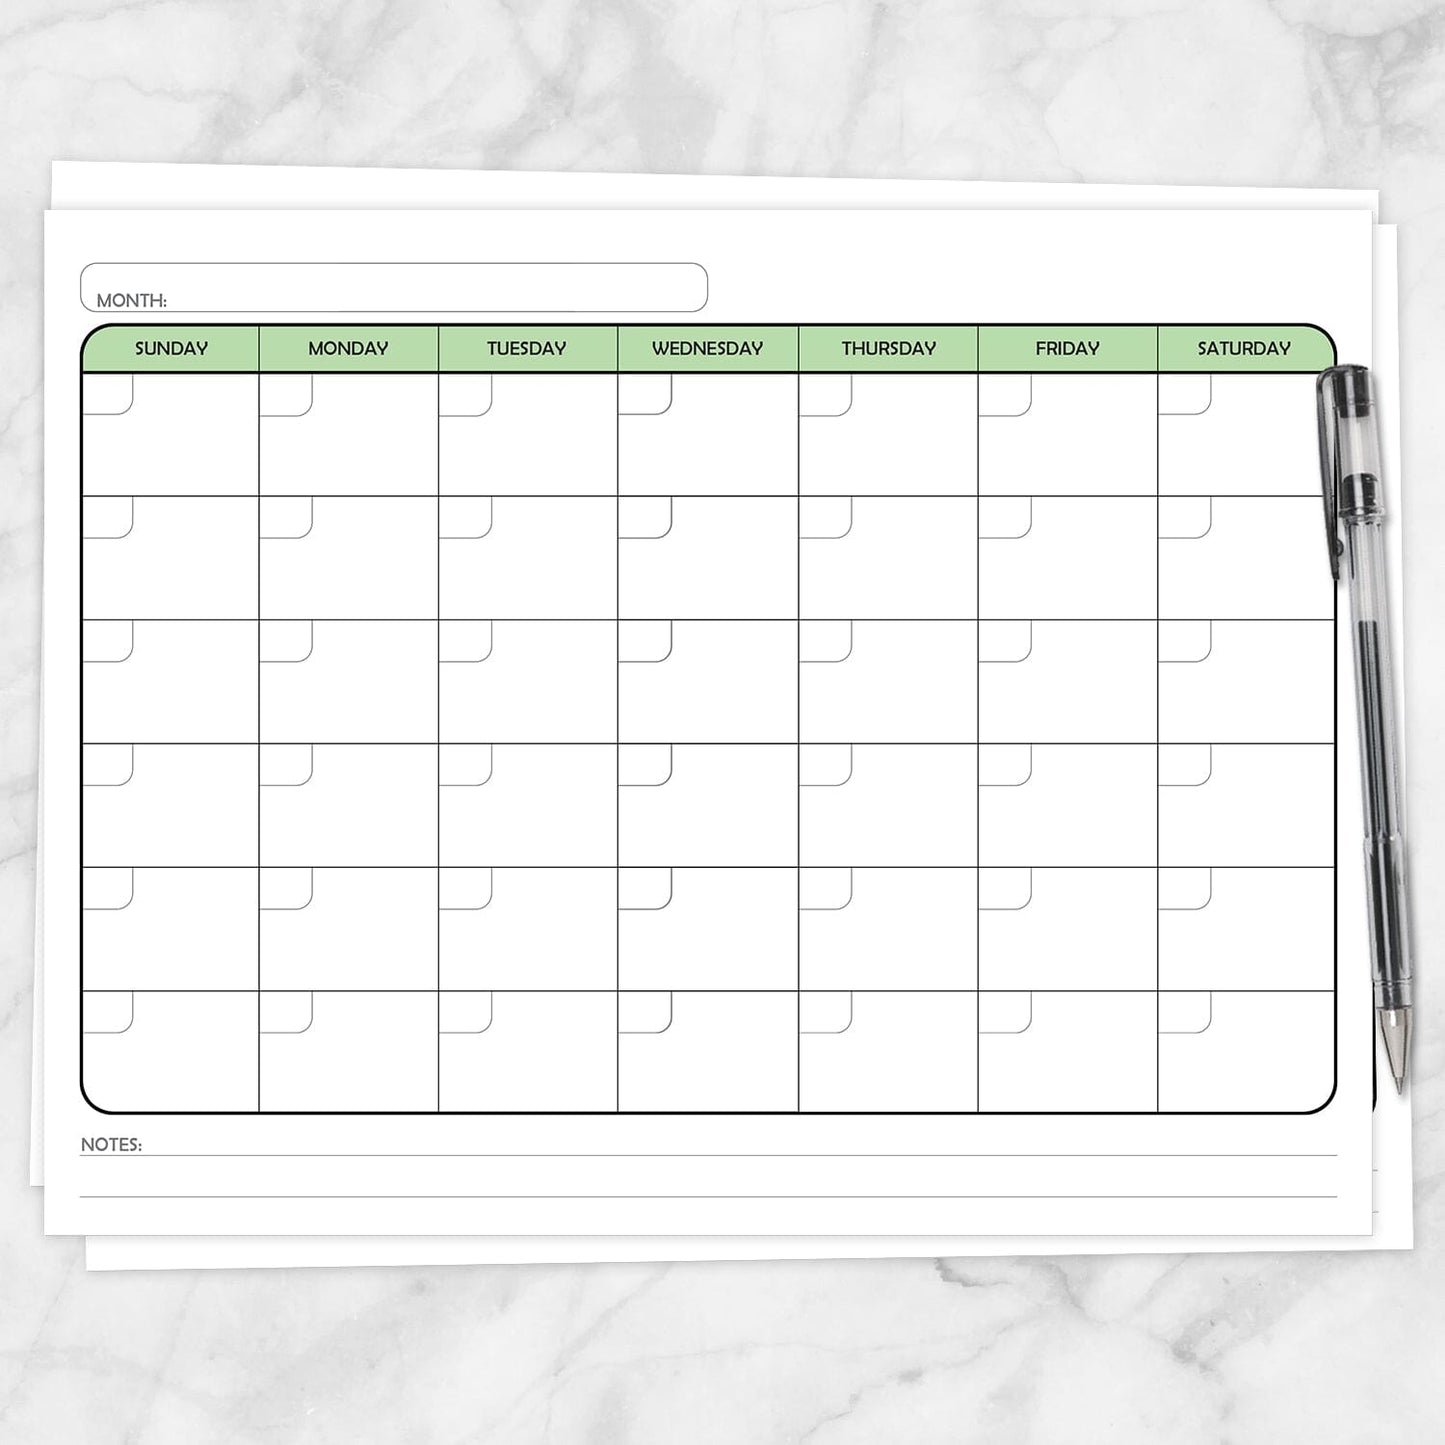 Printable Modern Green Blank Monthly Calendar - Full Page at Printable Planning.